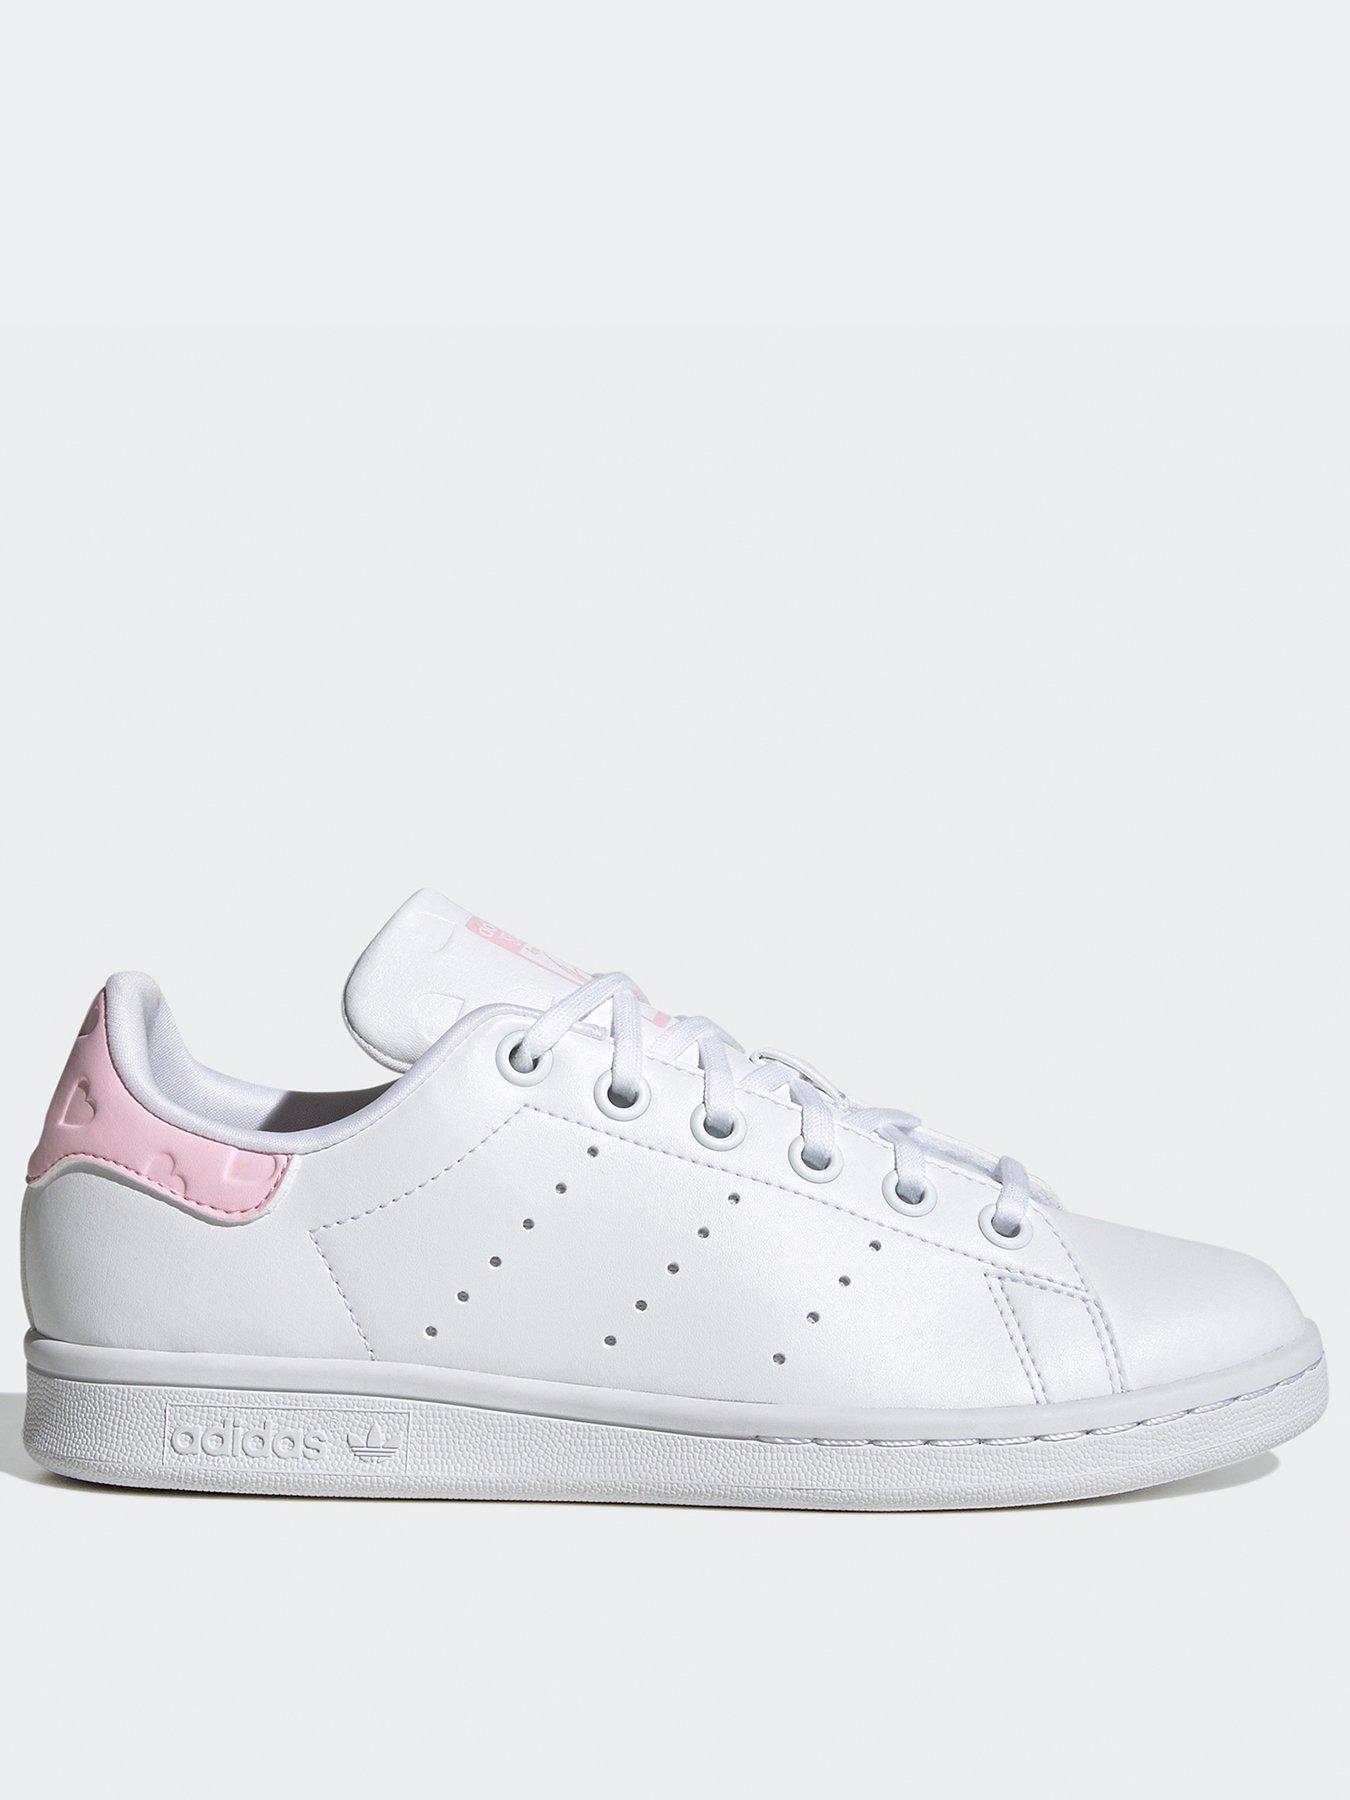 Kids Youth Black & White adidas Stan Smith Trainers